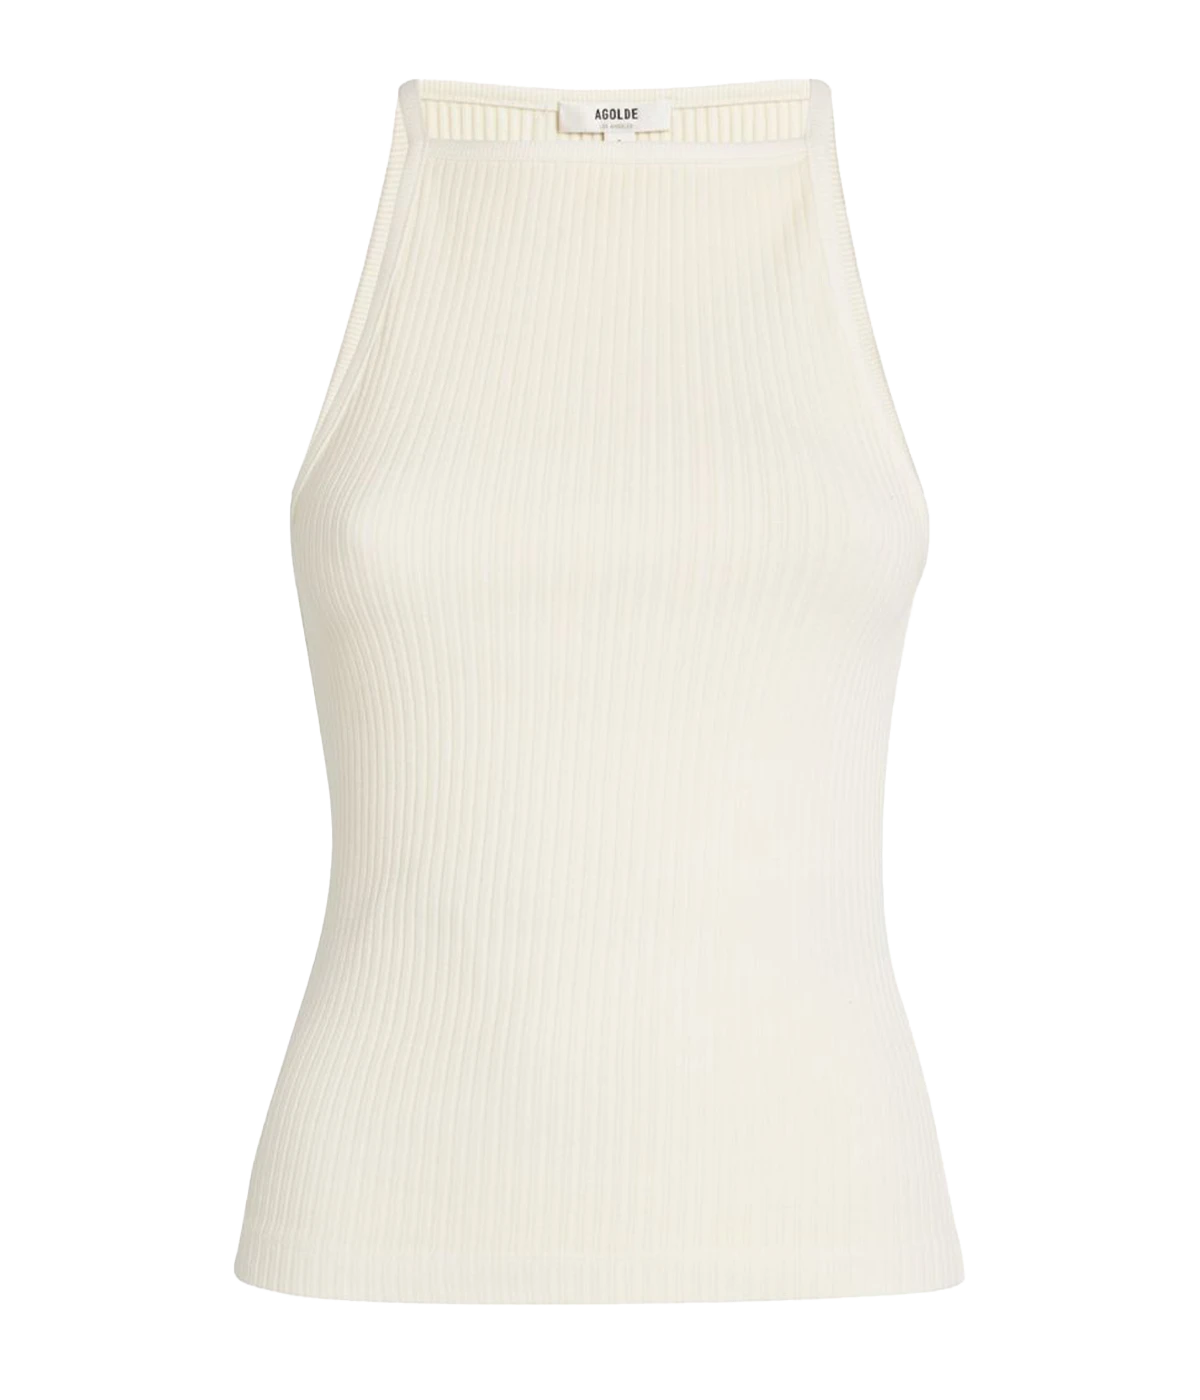 An elevated basic tank, made from a soft rib cotton and in a classic beige colourway. Featuring a high neckline, long bodice and flattering fit. Summer staple, bra friendly, date night top, made in USA, comfortable, elevated basic, date night top.